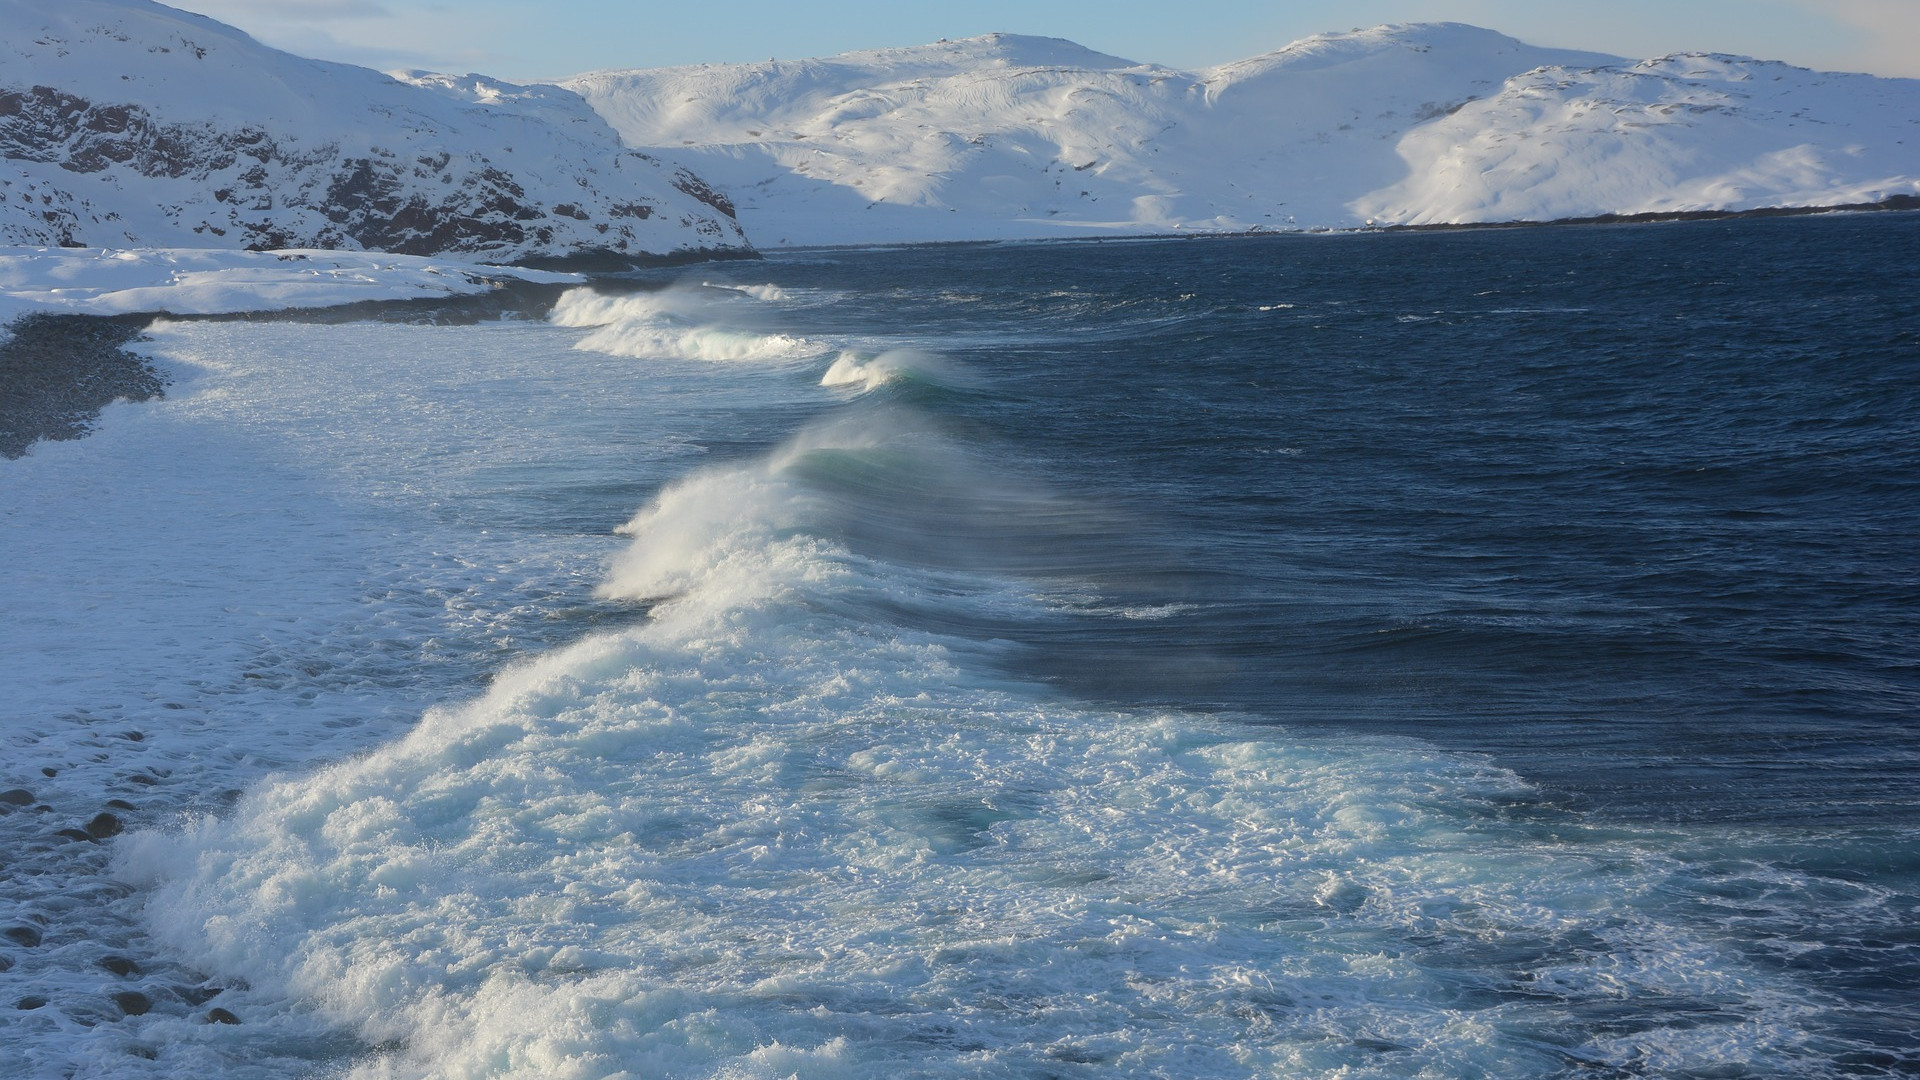 A coastline with ocean and snow-capped mountains